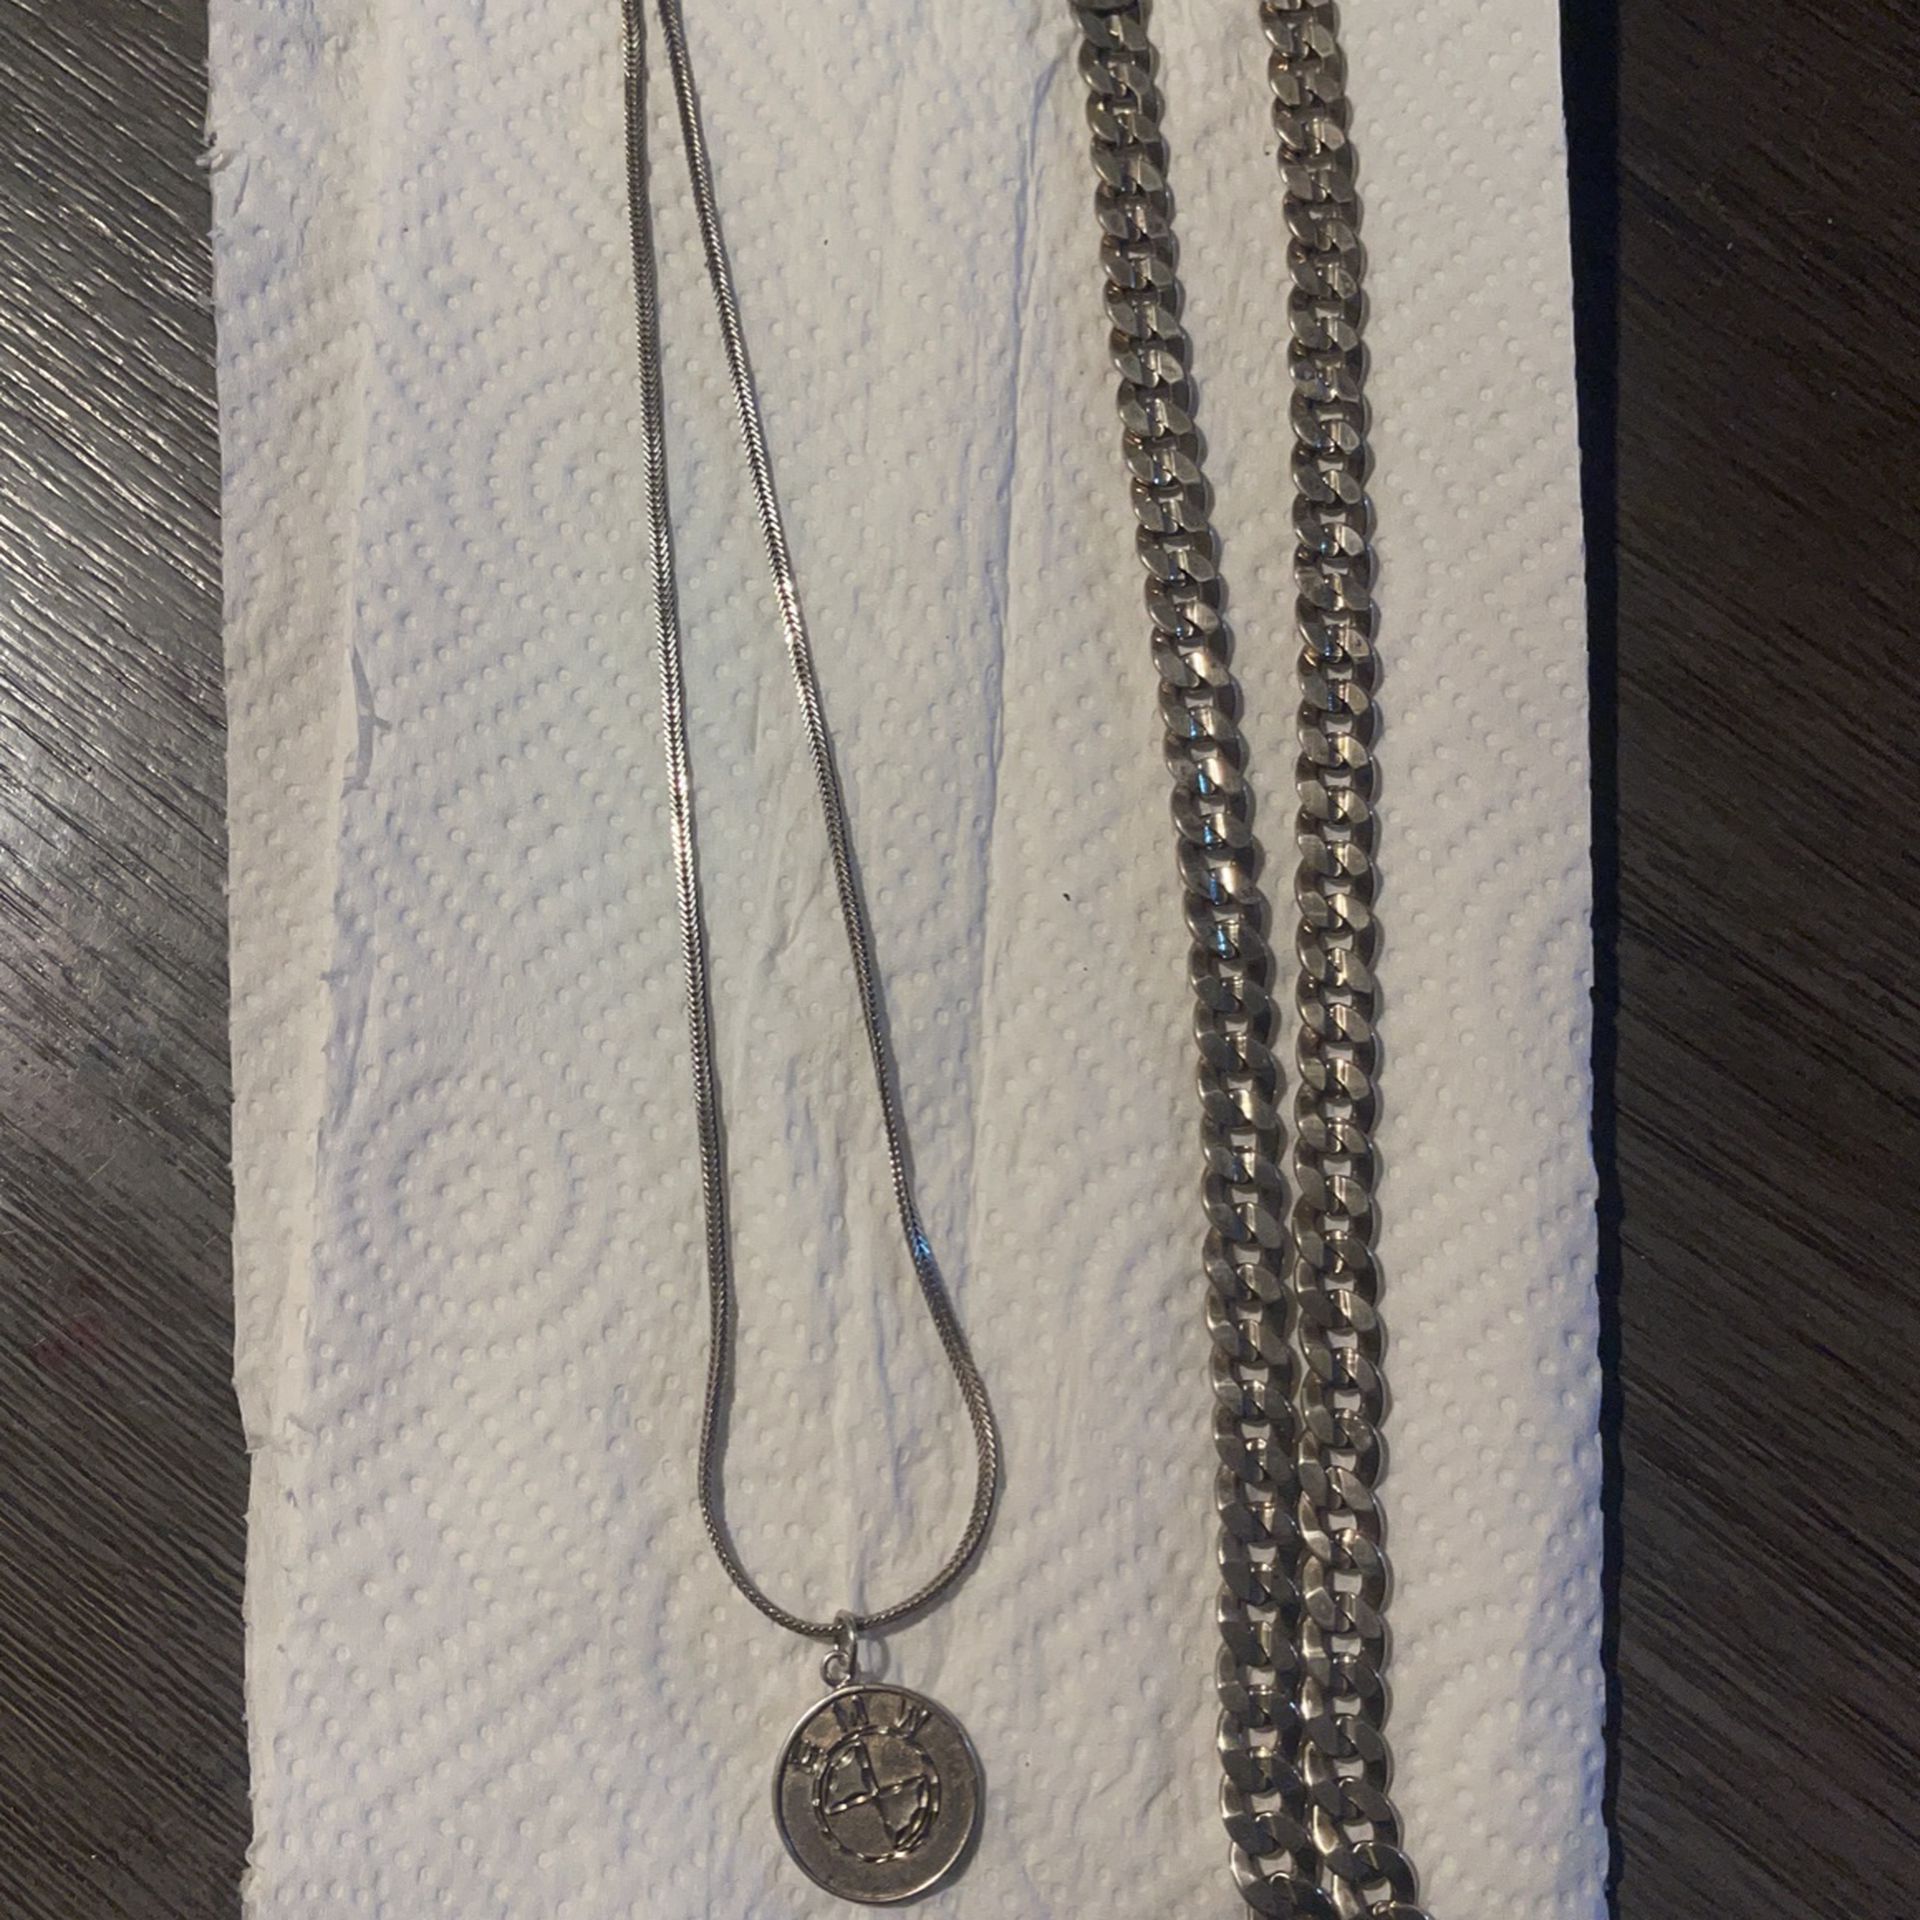 925 Silver Chains And Ring Necklace Set 200$ Firm 